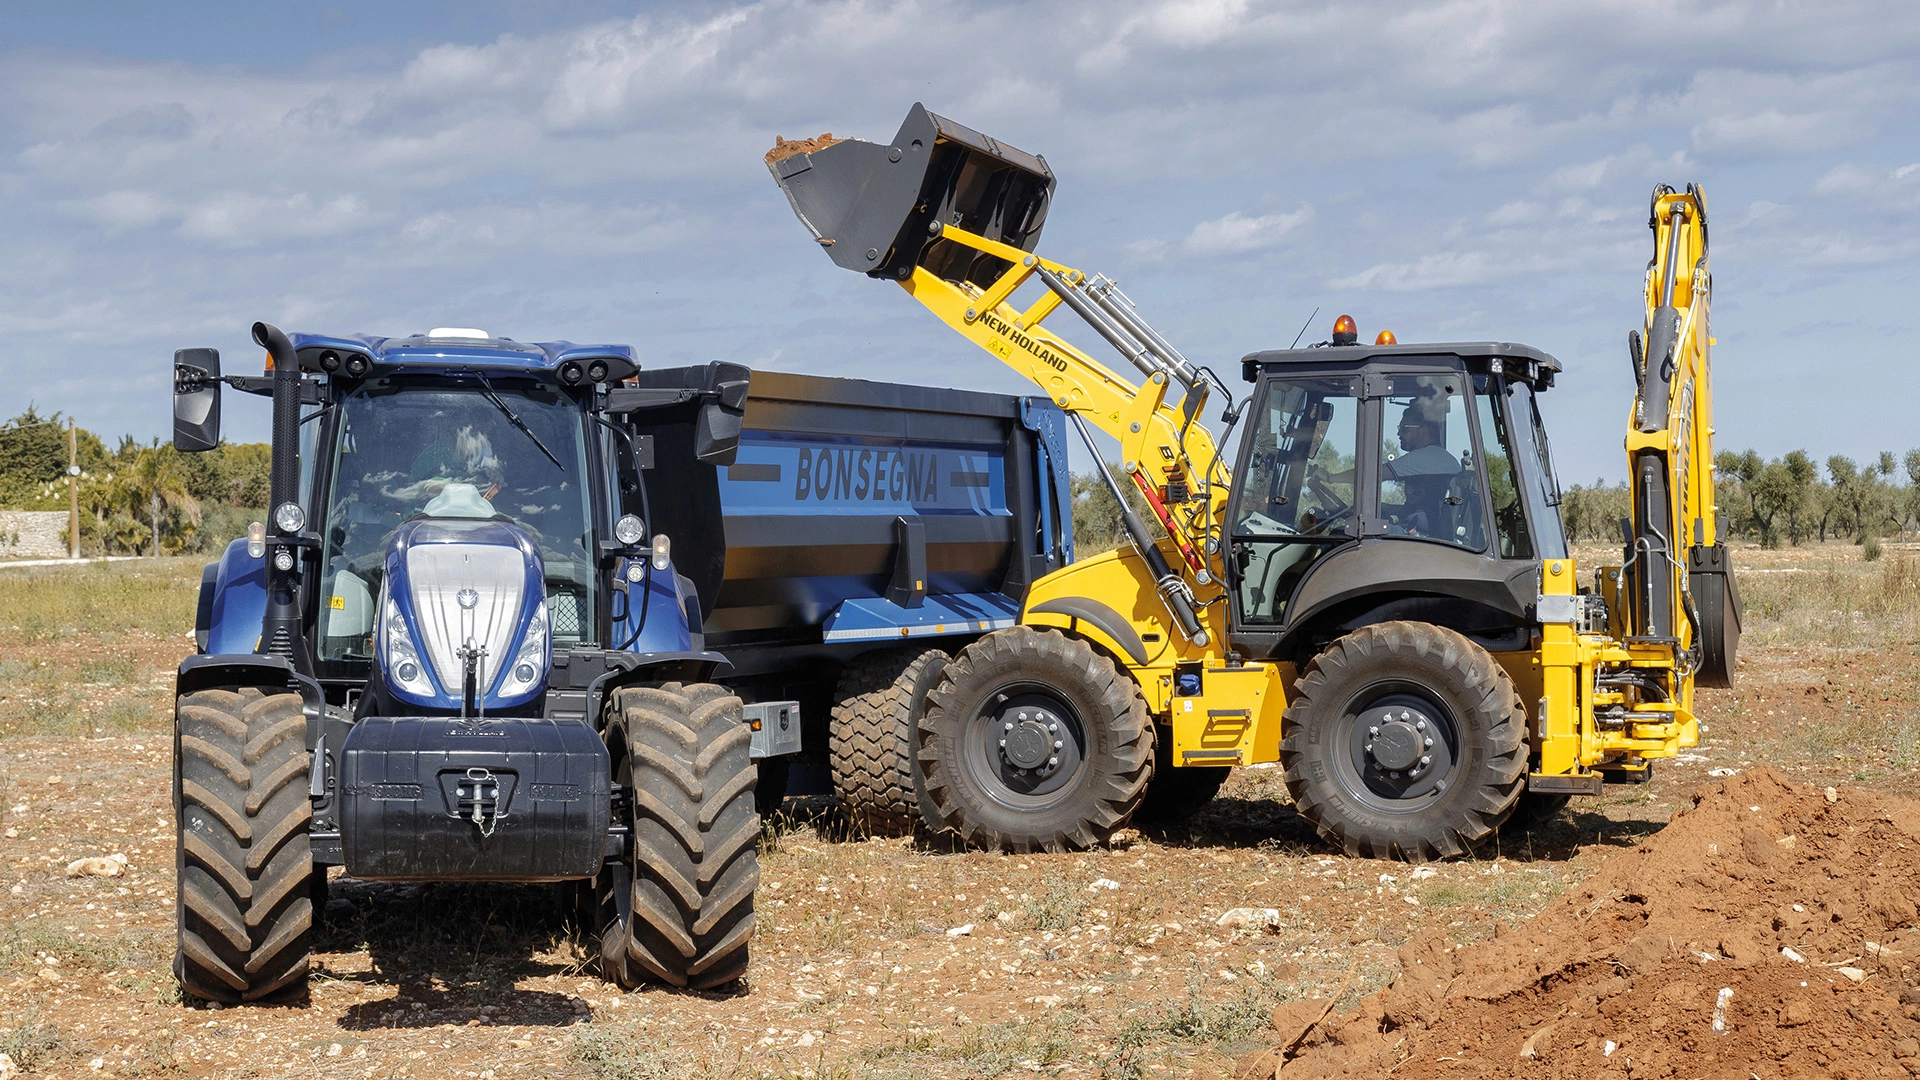 New Holland tractor & backhoe at work, loading soil into a trailer on a clear field day.